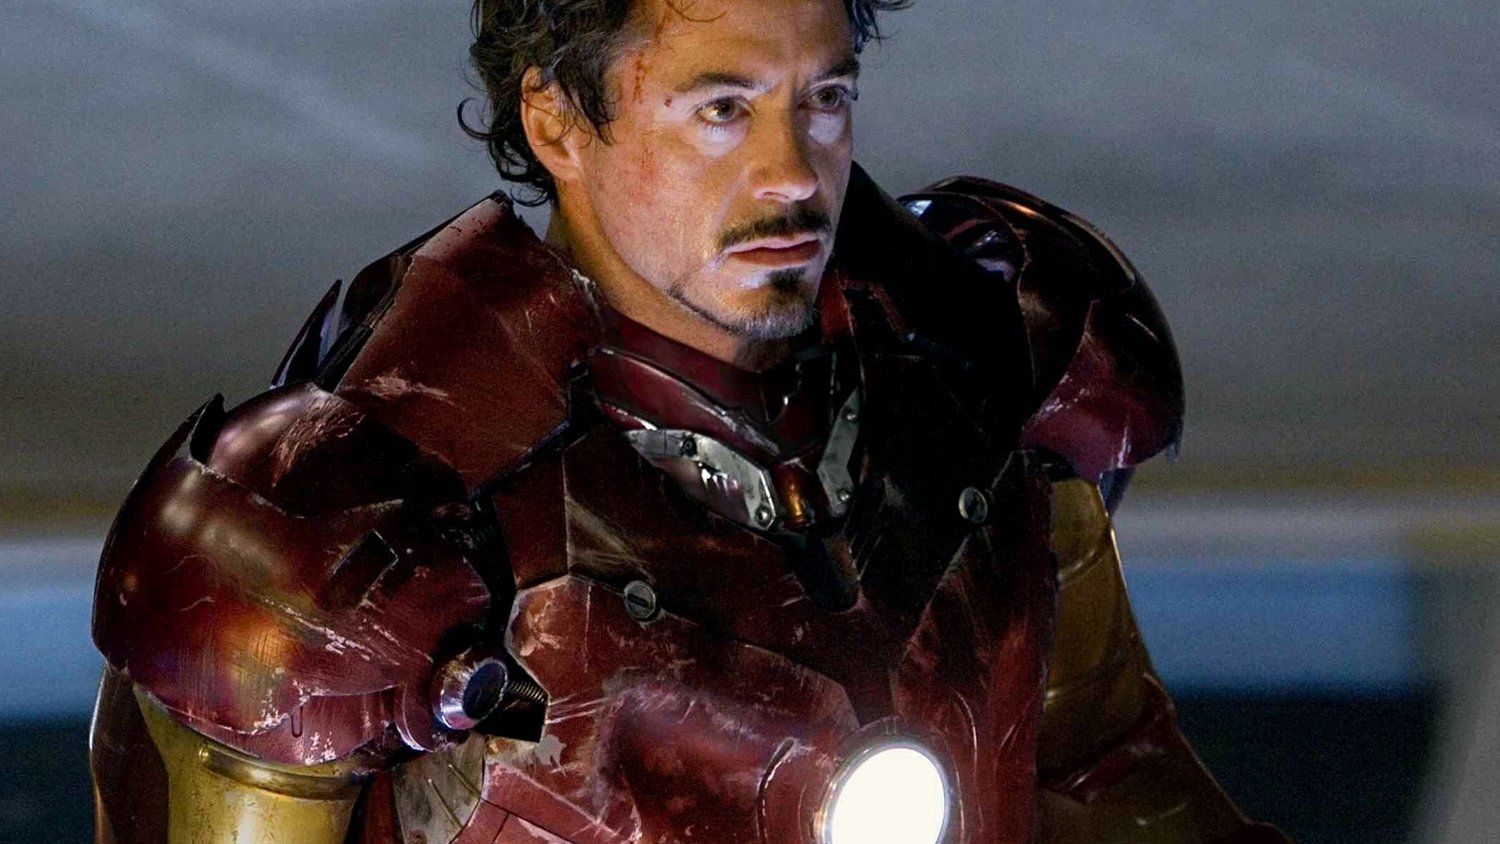 Iron Man looking wounded in Iron Man